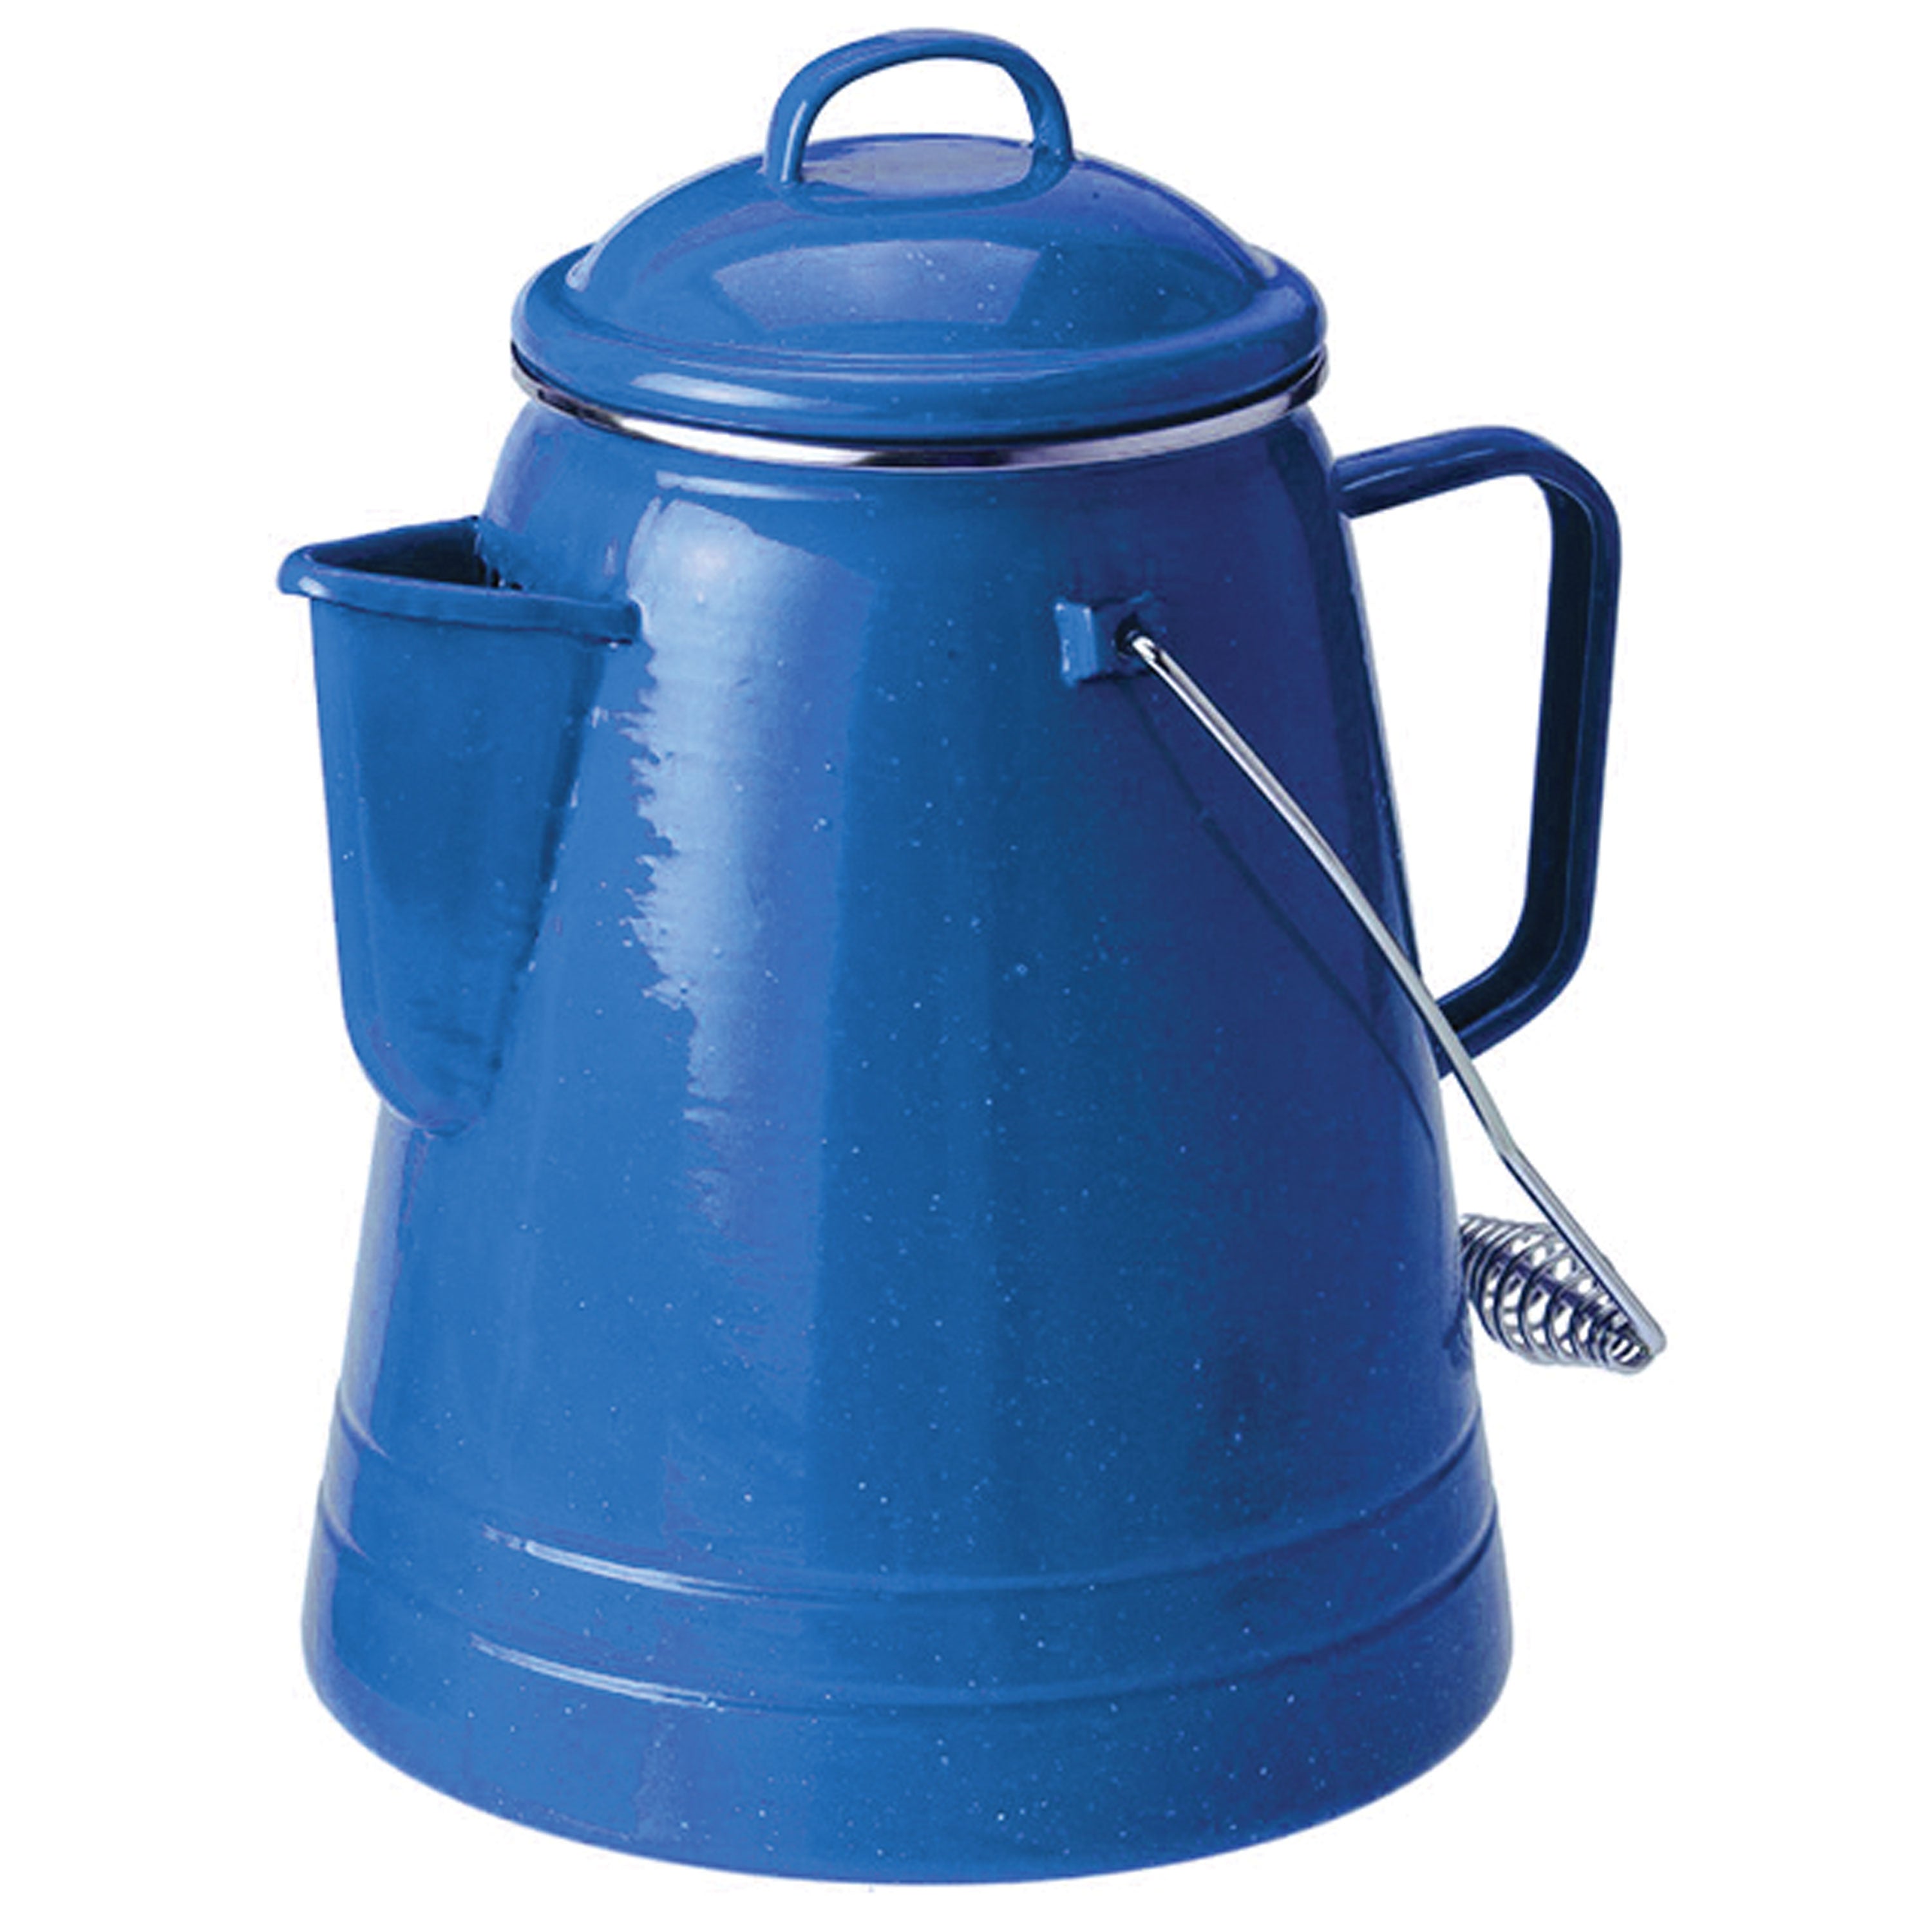 GSI Outdoors 15166 36 Cup Coffee Boiler - Blue